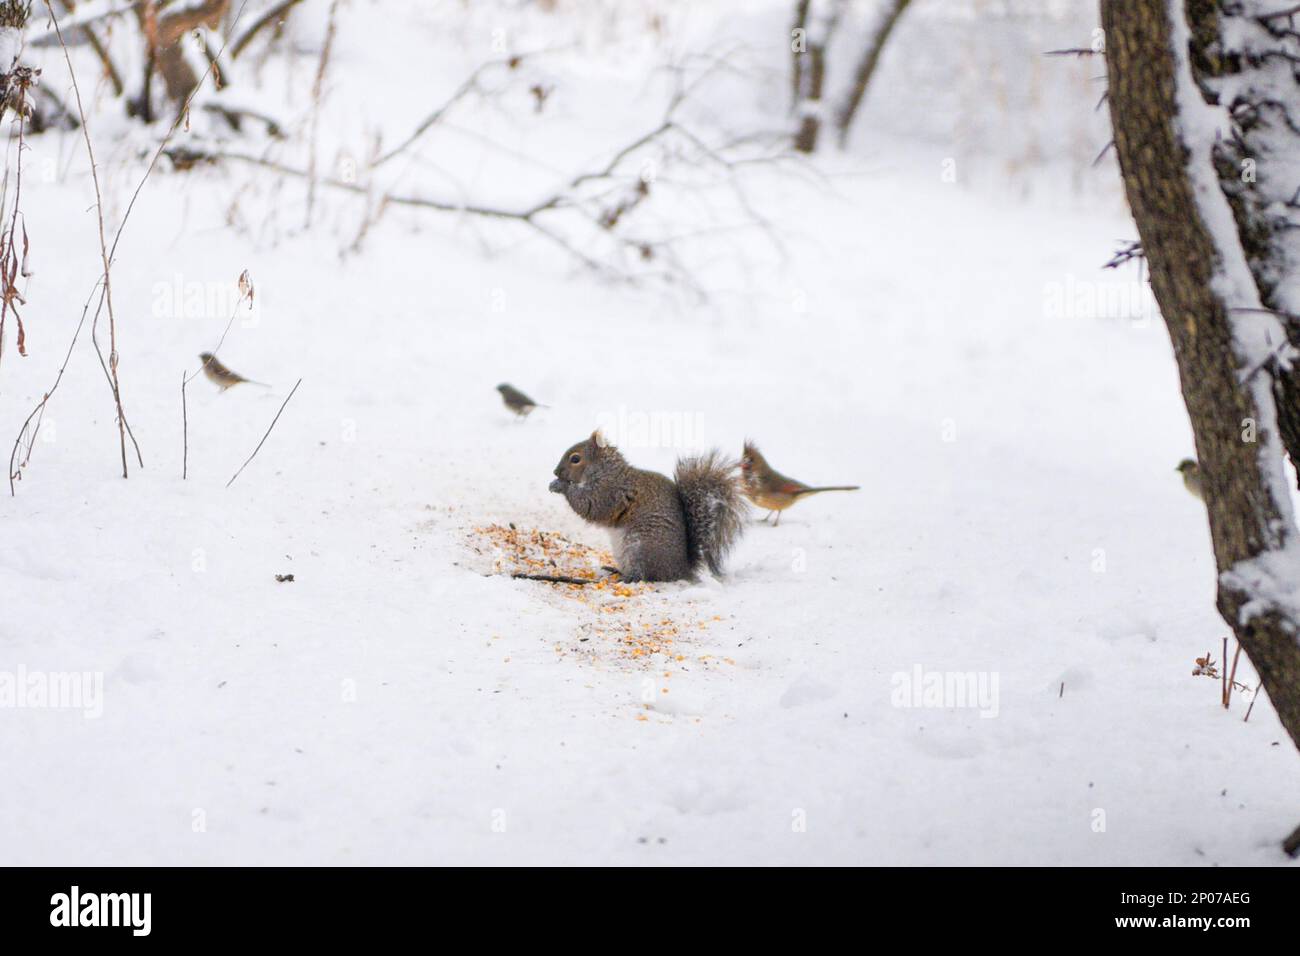 Squirrels eating nuts on snow winter season Stock Photo